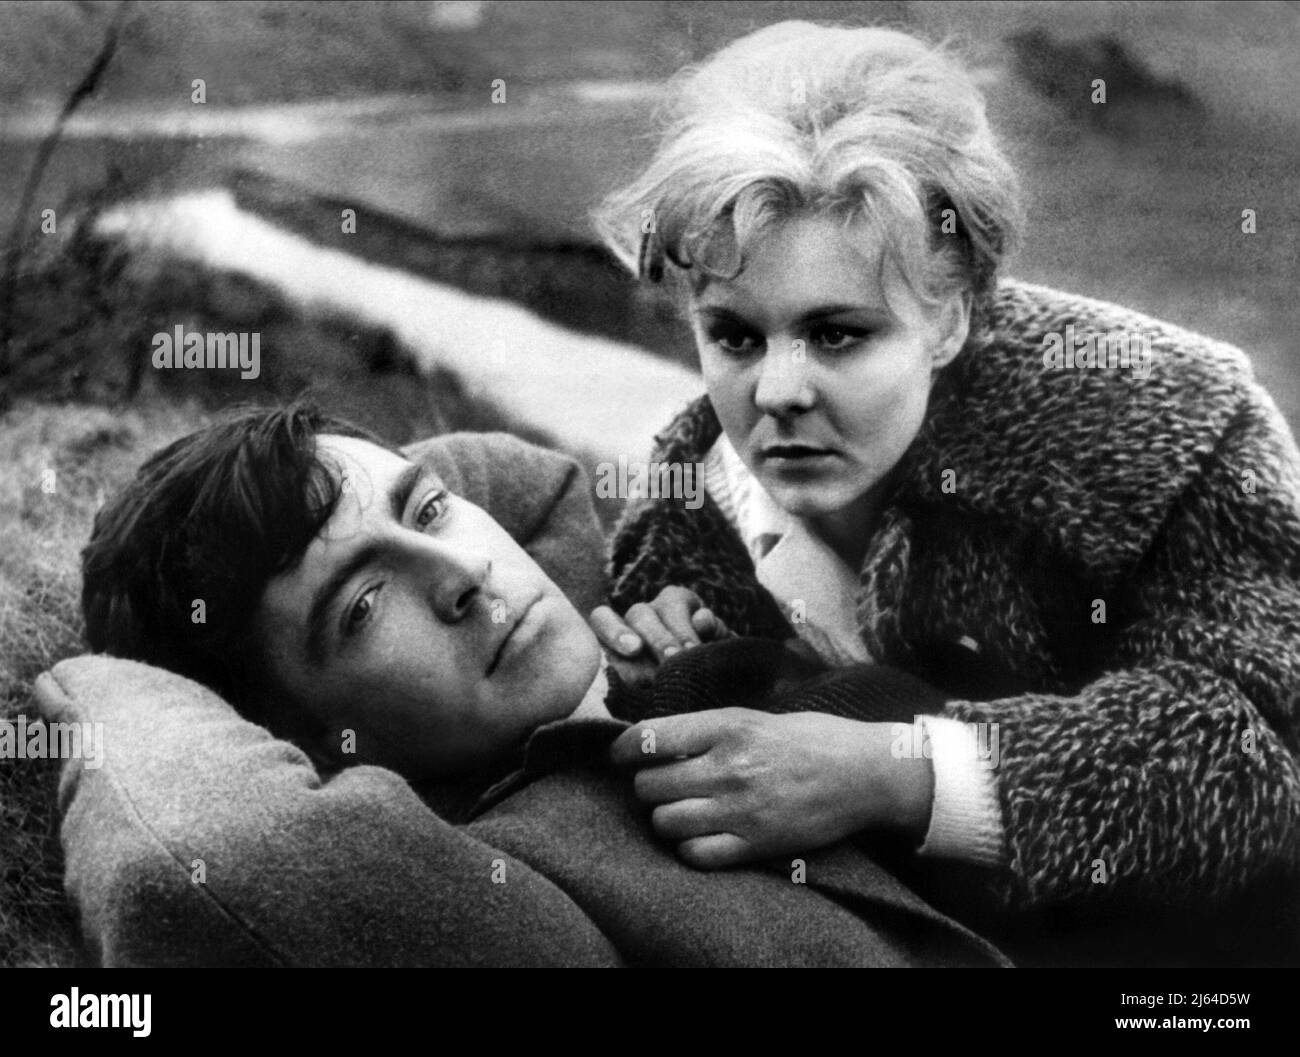 BATES,RITCHIE, A KIND OF LOVING, 1962 Stock Photo